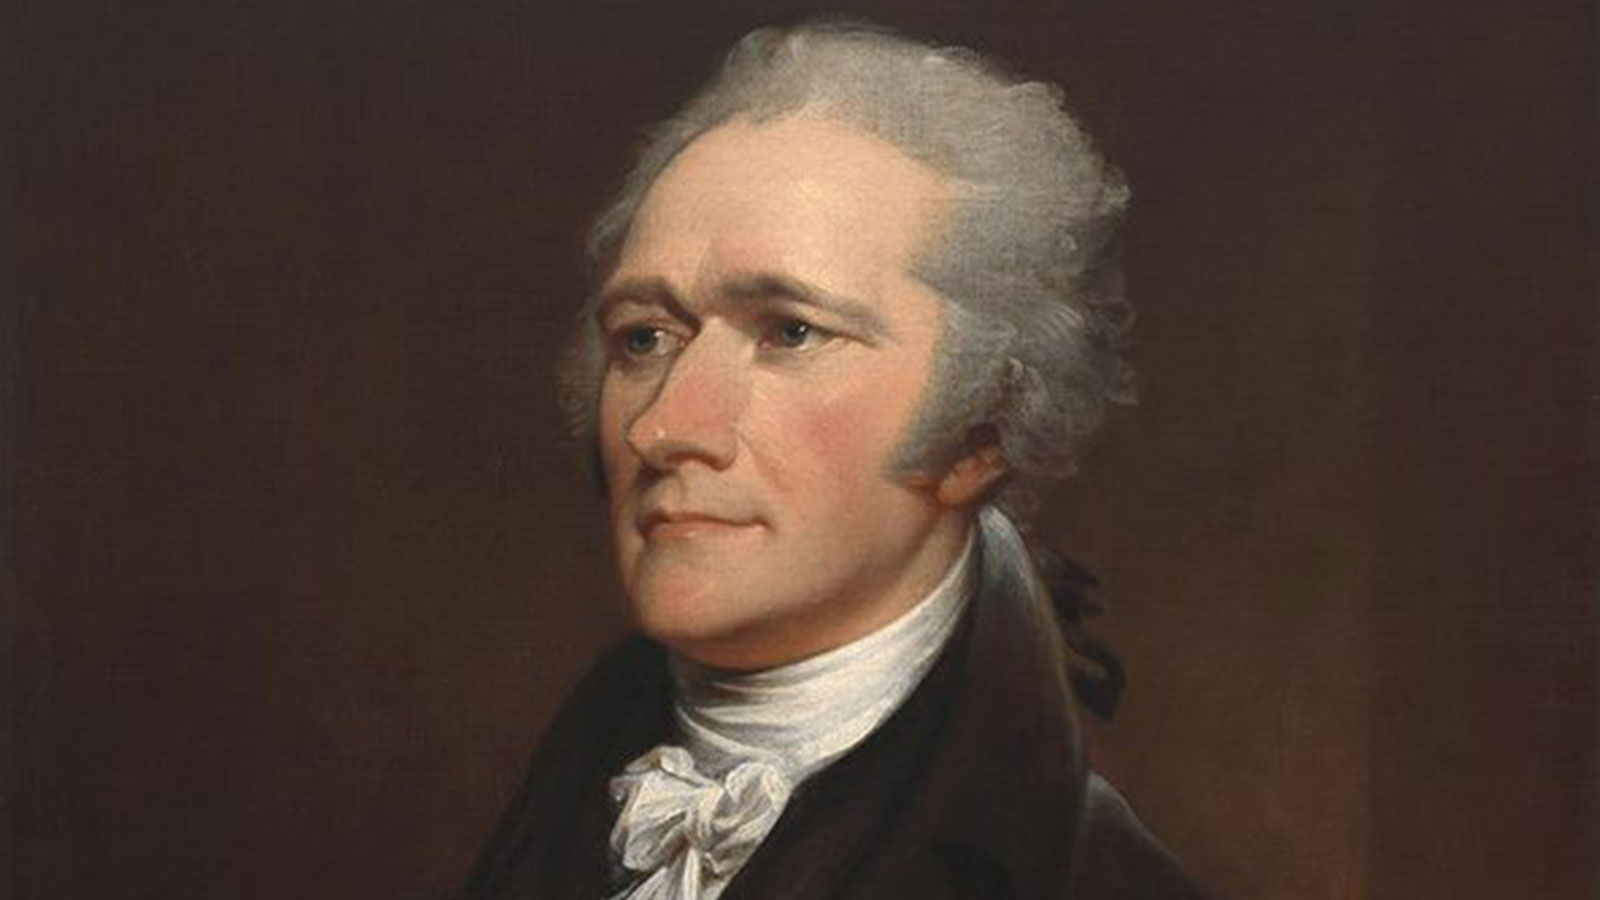 New research suggests Alexander Hamilton was a slave owner